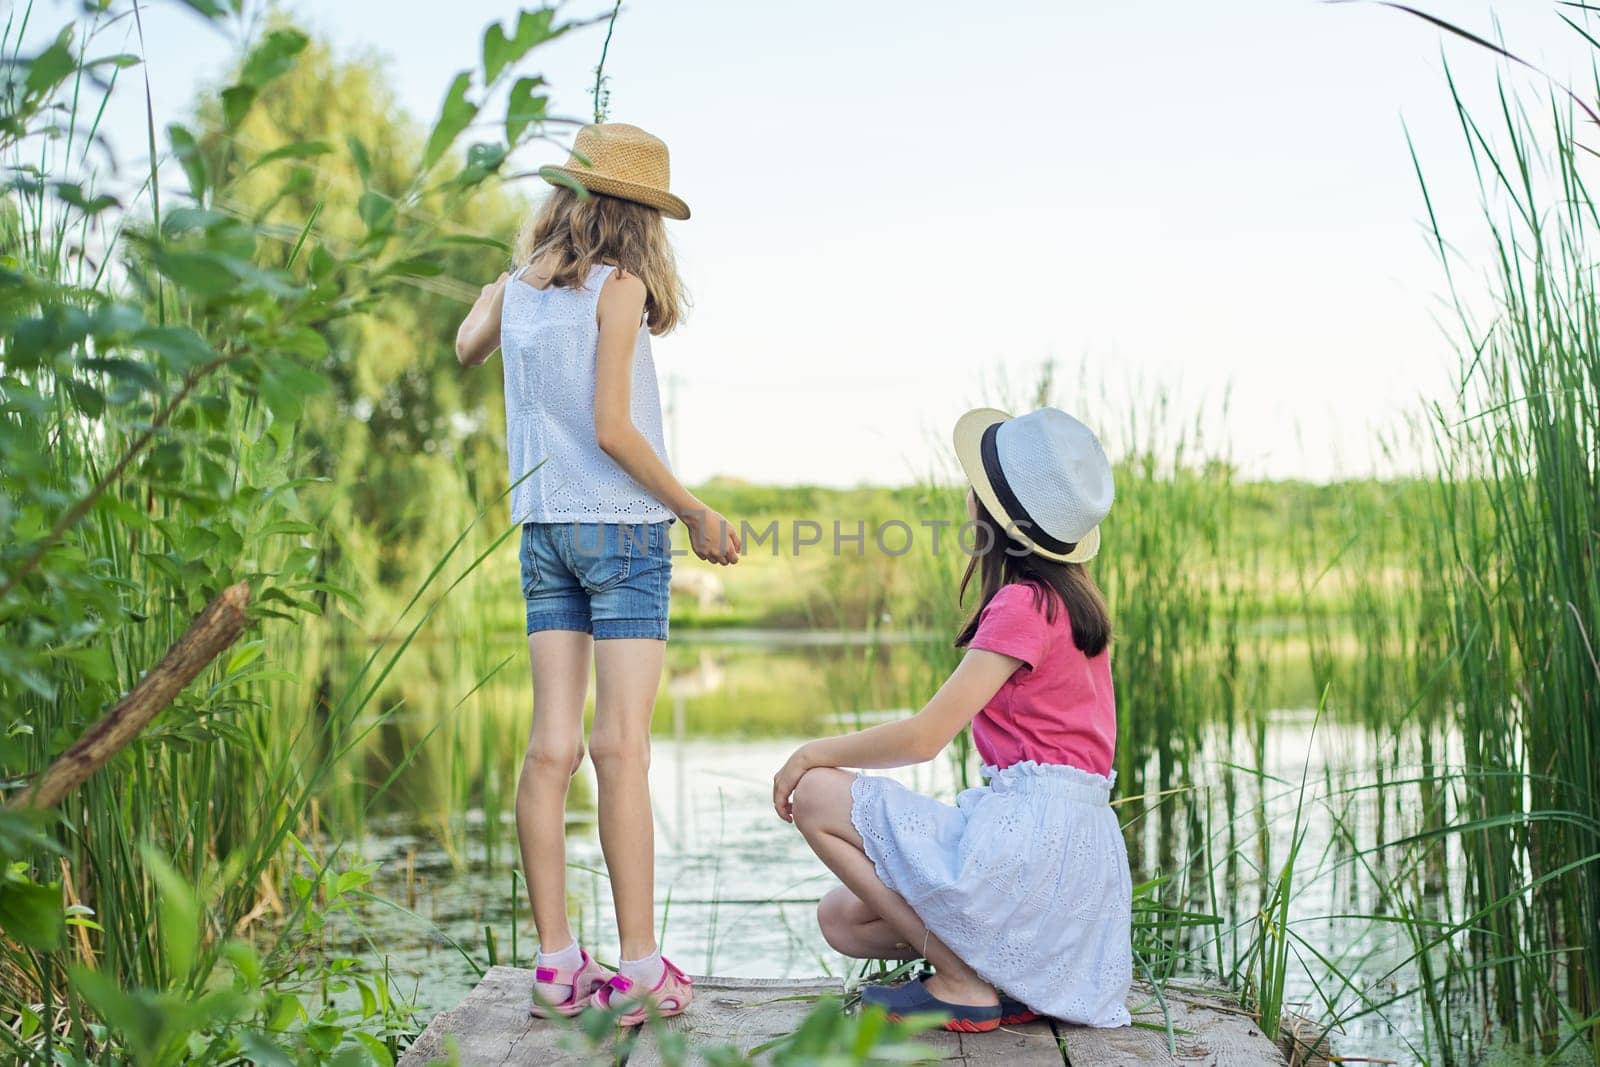 Two pretty girls children sitting on wooden pier of the lake in reeds, playing with water, talking, back view. Summer holidays, nature, happy childhood, friendship, country style.